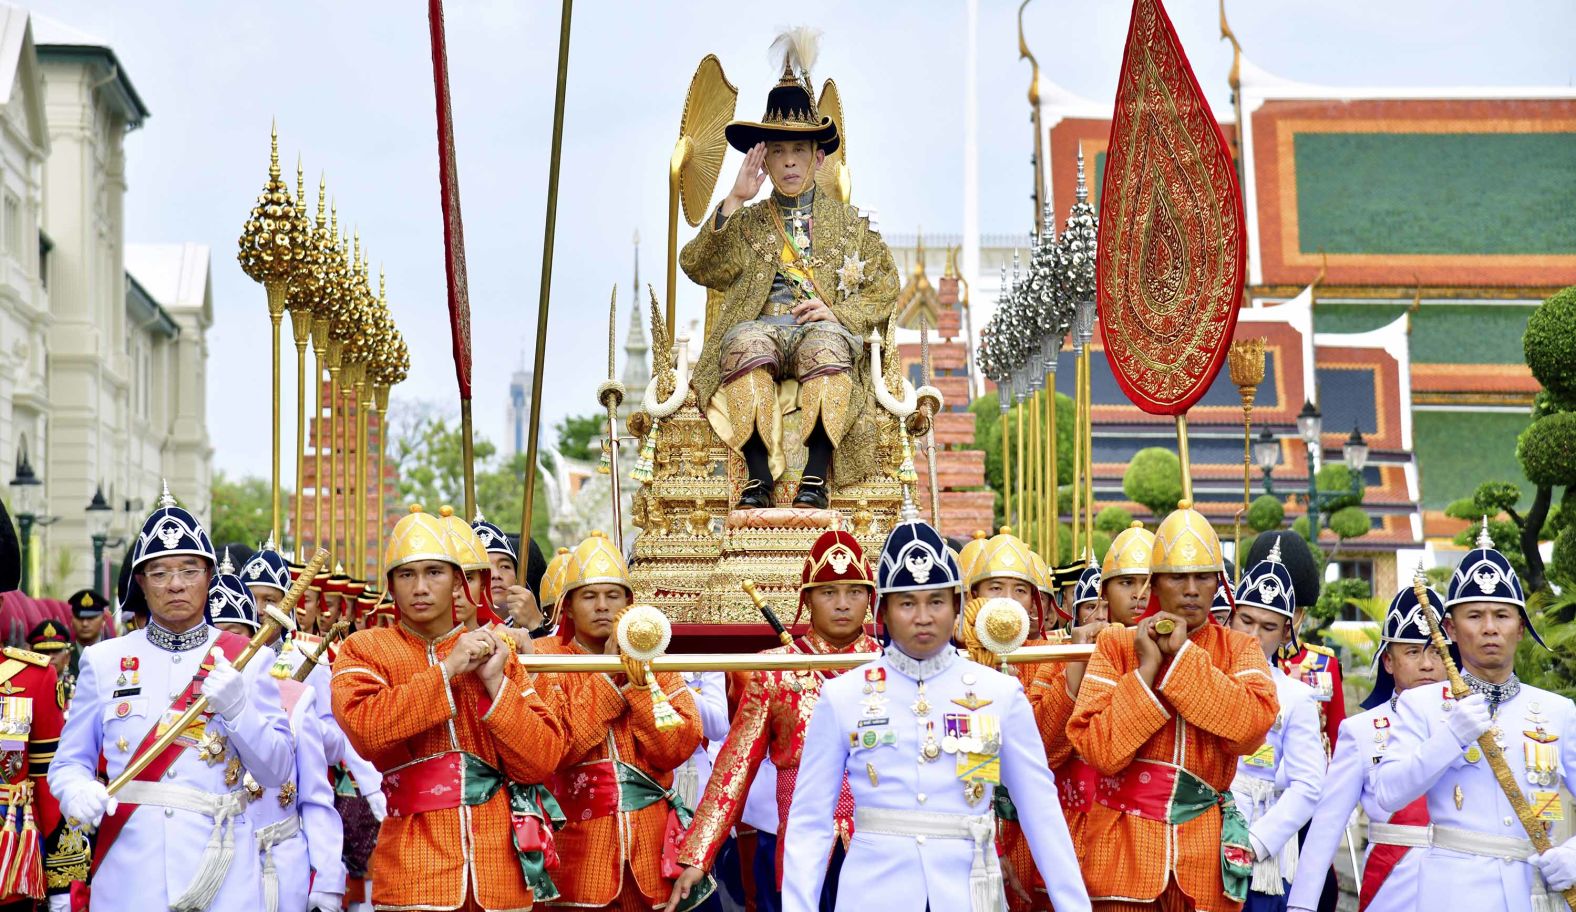 Vajiralongkorn is carried in a golden palanquin during his coronation procession in Bangkok in May 2019.